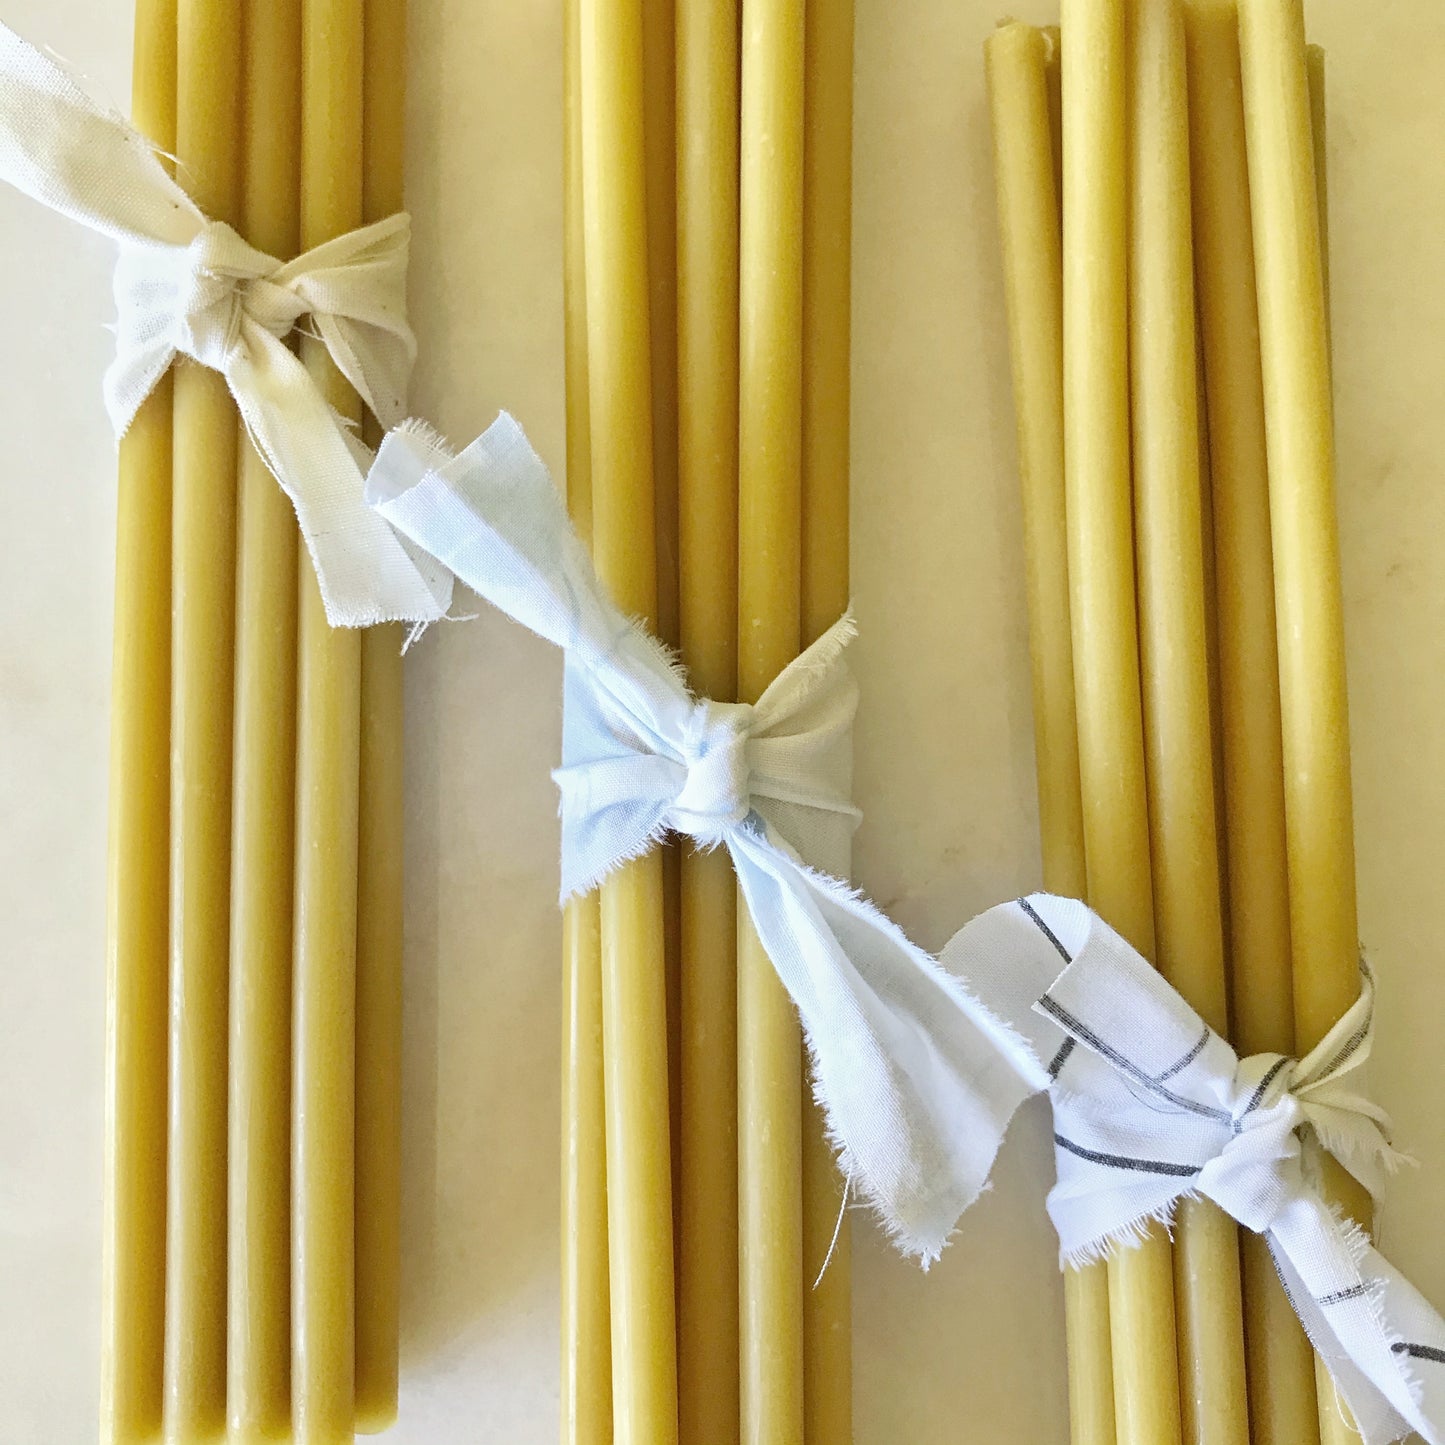 Bundle of 10” Beeswax Candles, 12 ct